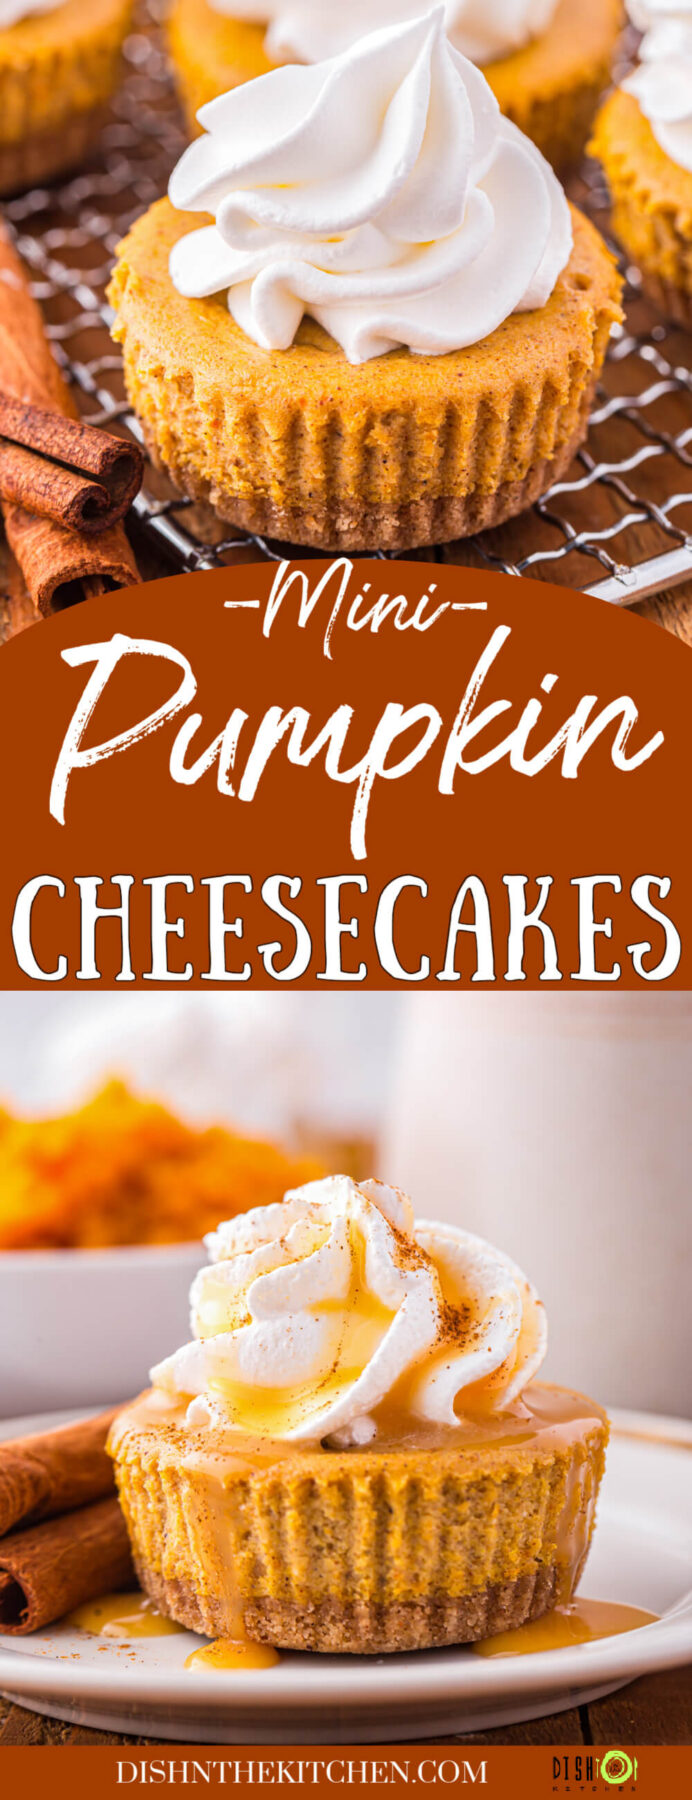 PInterest image featuring mini pumpkin cheesecake topped with whipped cream.